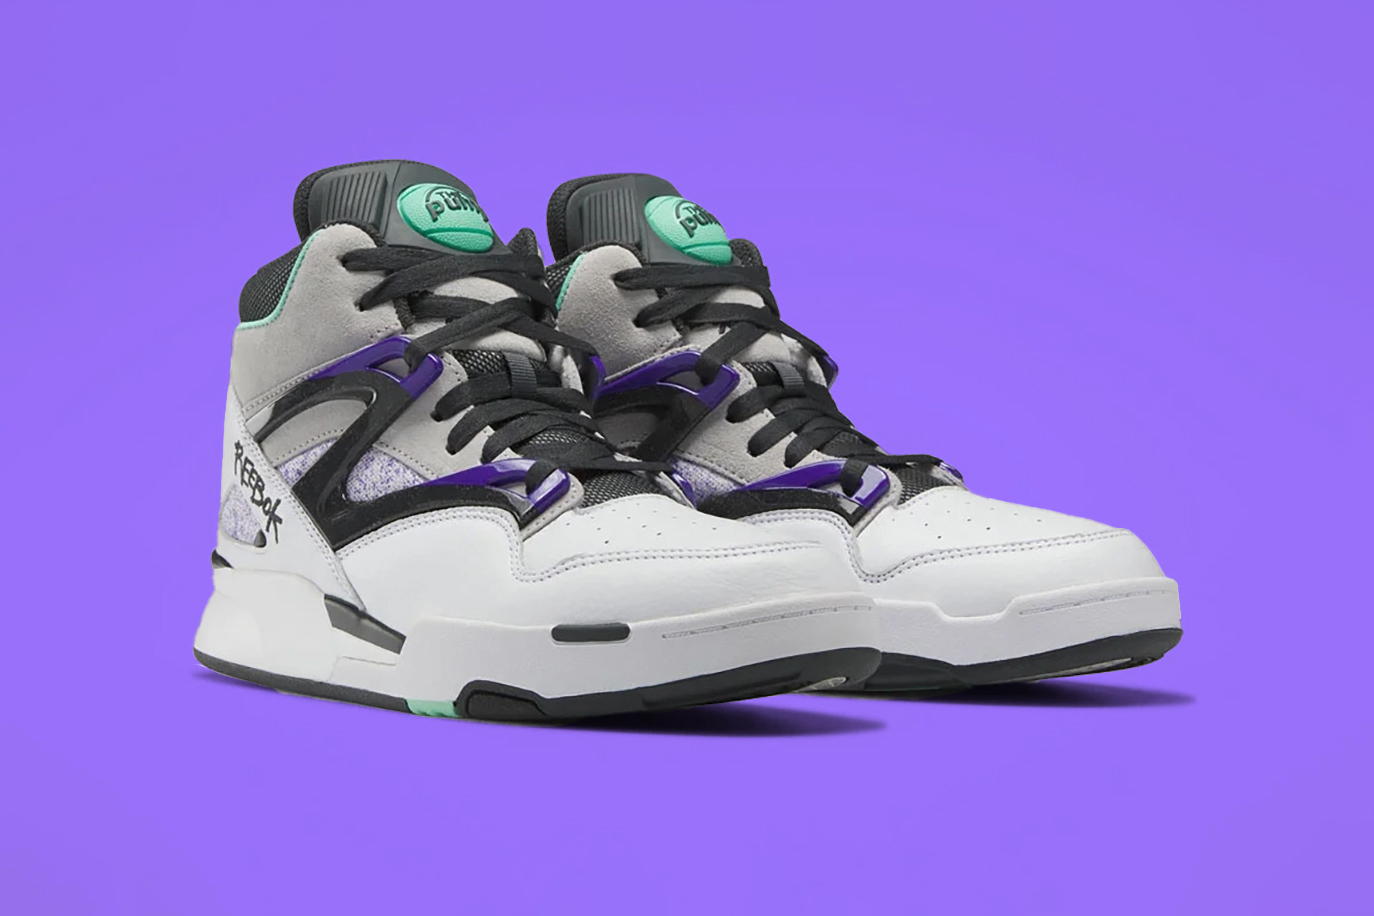 This Reebok Pump Omni Zone II Returns to Its ‘90s Roots